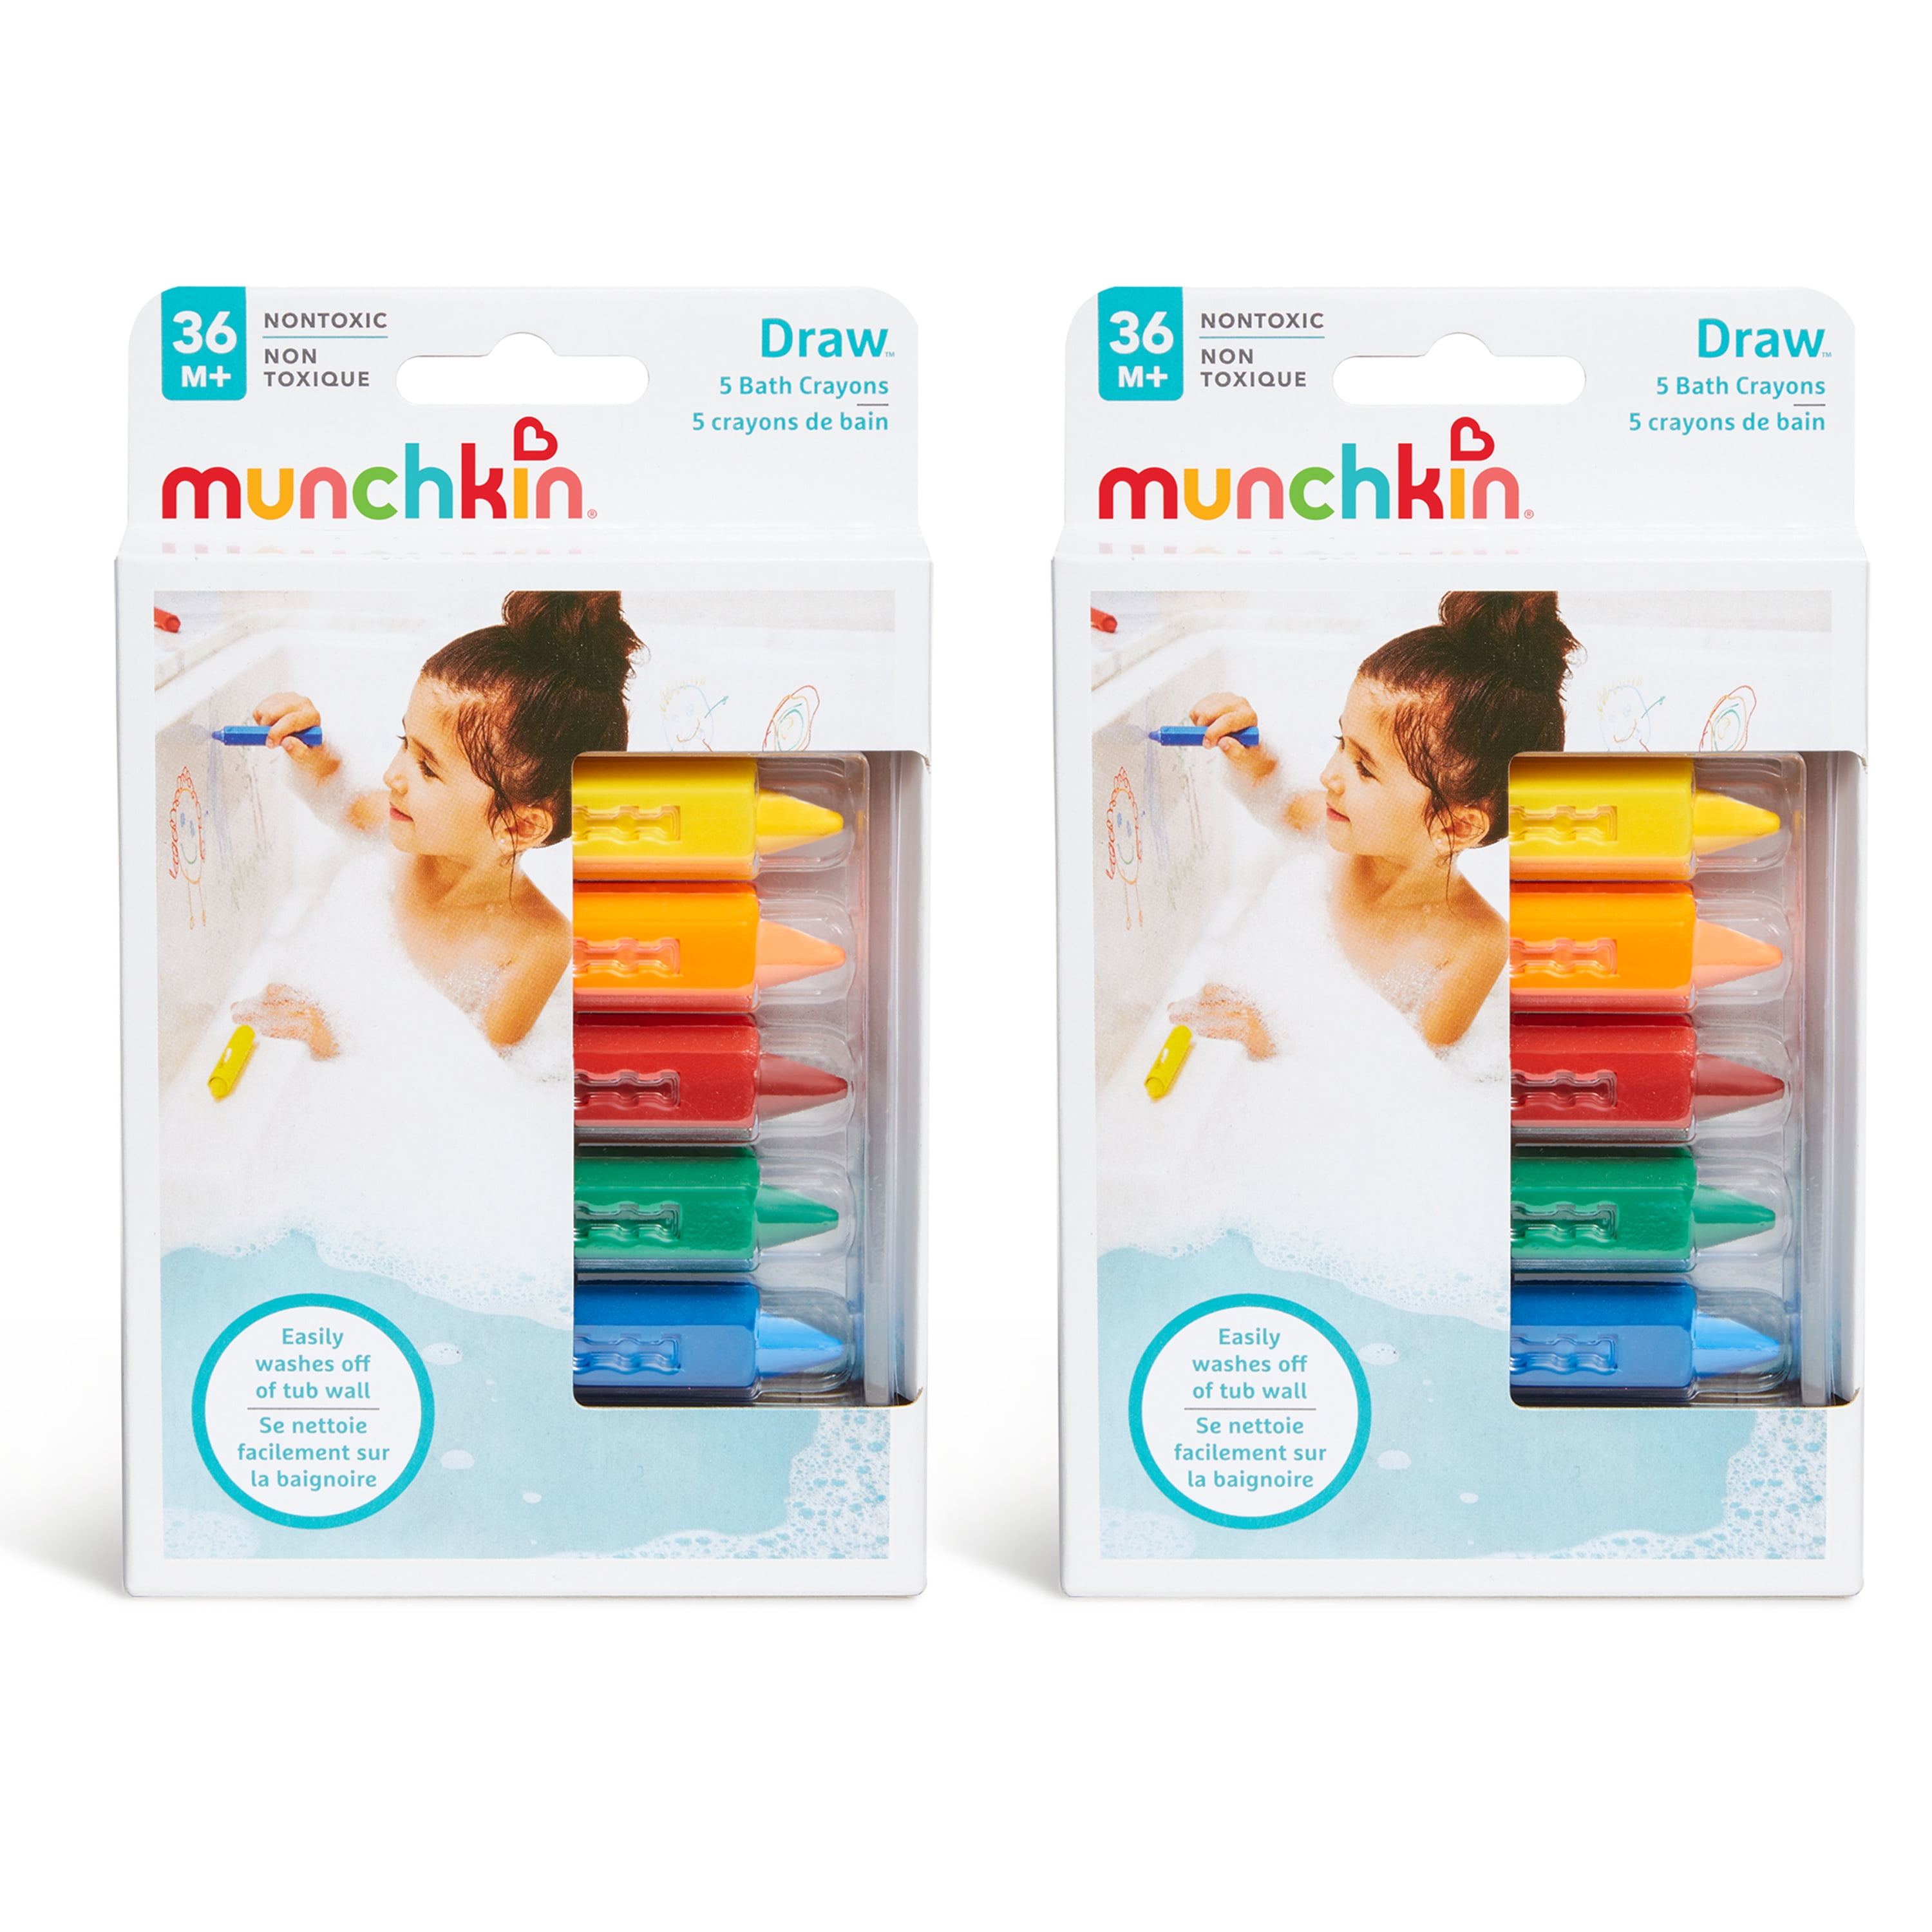 You Need to Invest in Munchkin's Bath Crayons! - Ksenfully Good